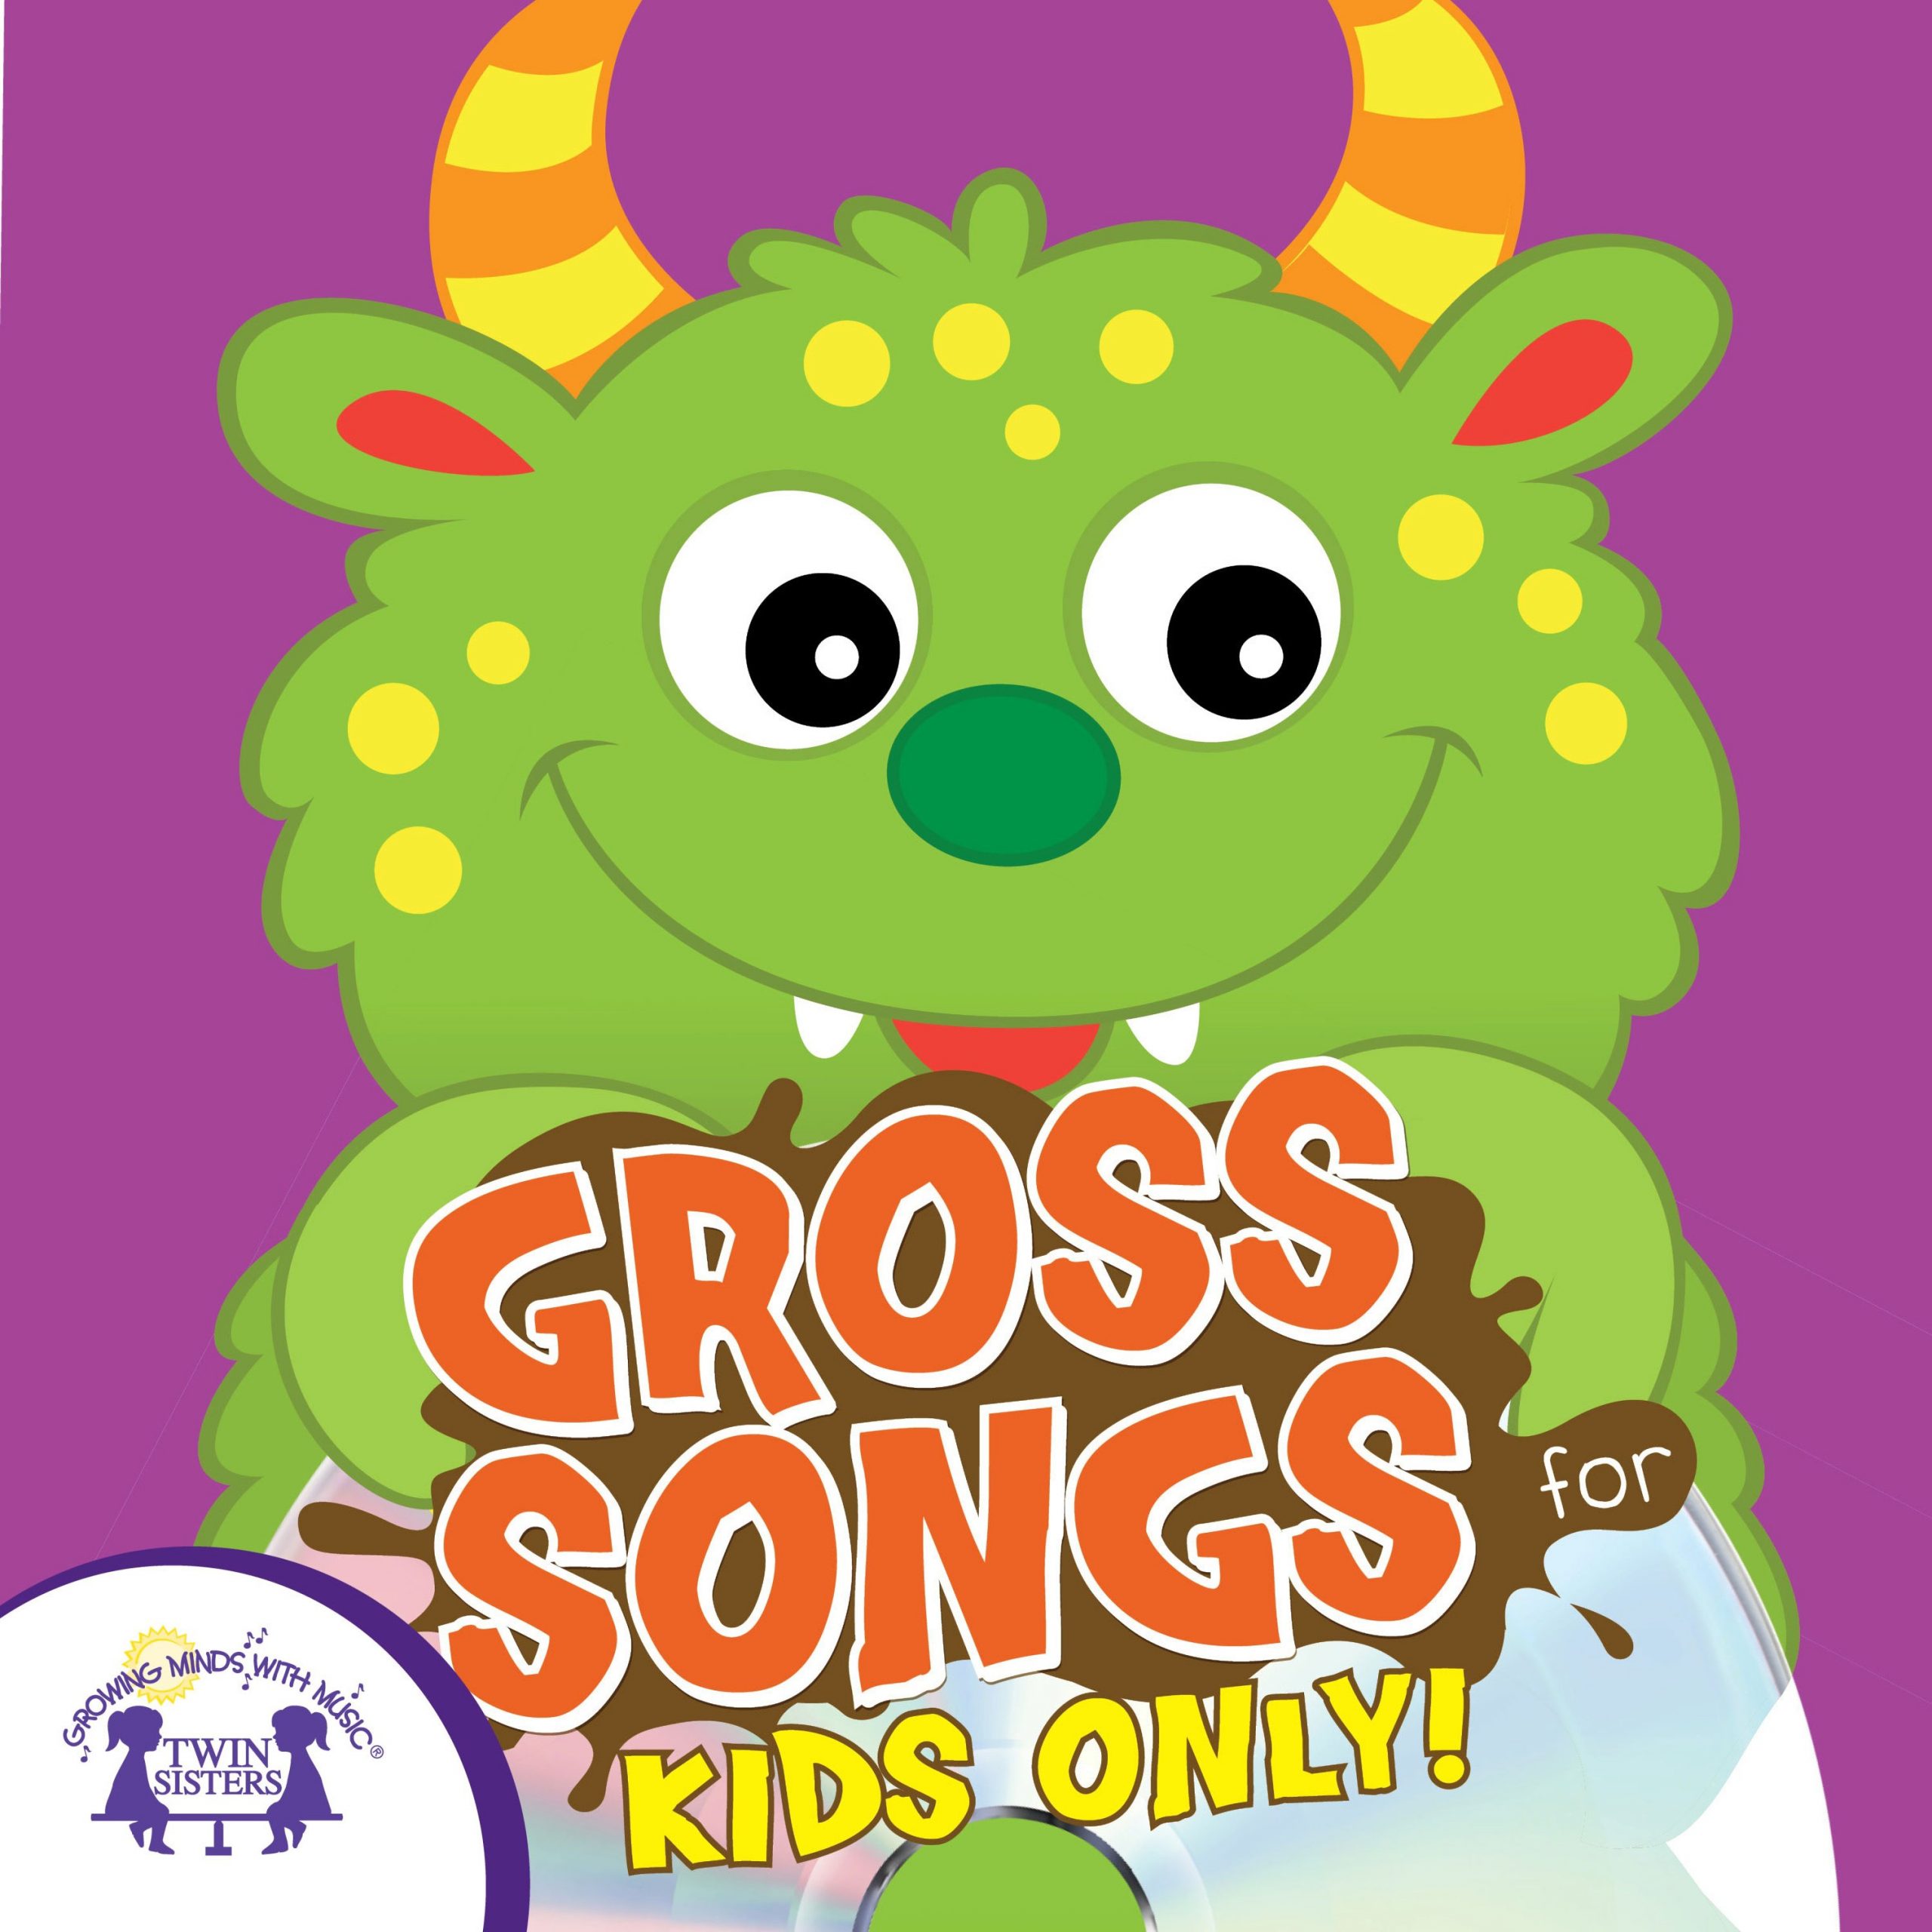 Gross Songs For Kids Only | Twin Sisters